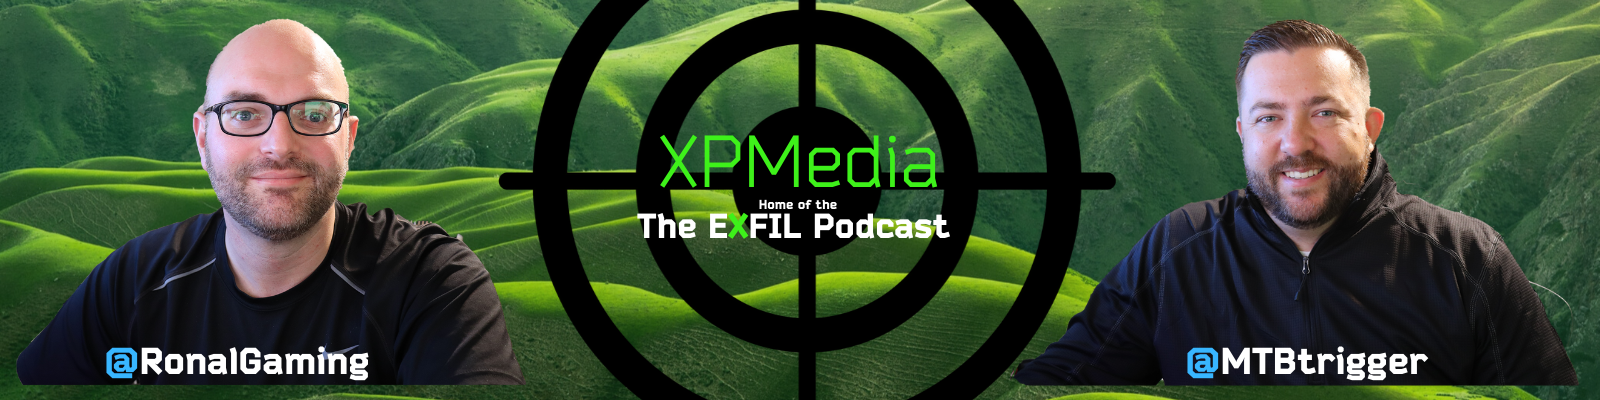 EXFIL - An Escape From Tarkov Podcast